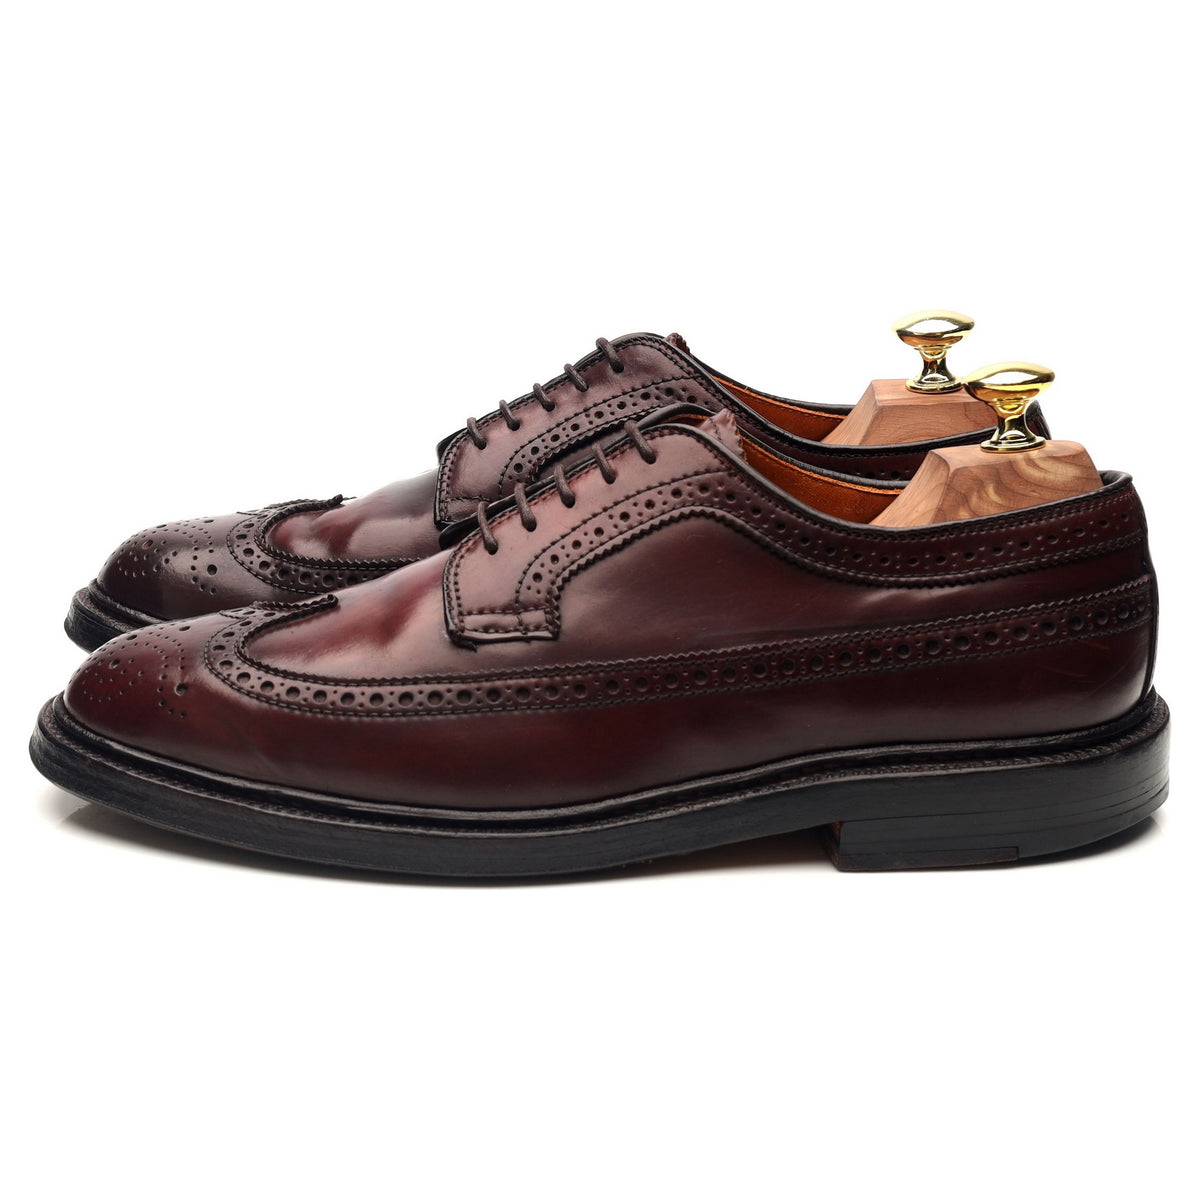 975' Burgundy Cordovan Leather Derby Brogues UK 6 US 6.5 - Abbot's 